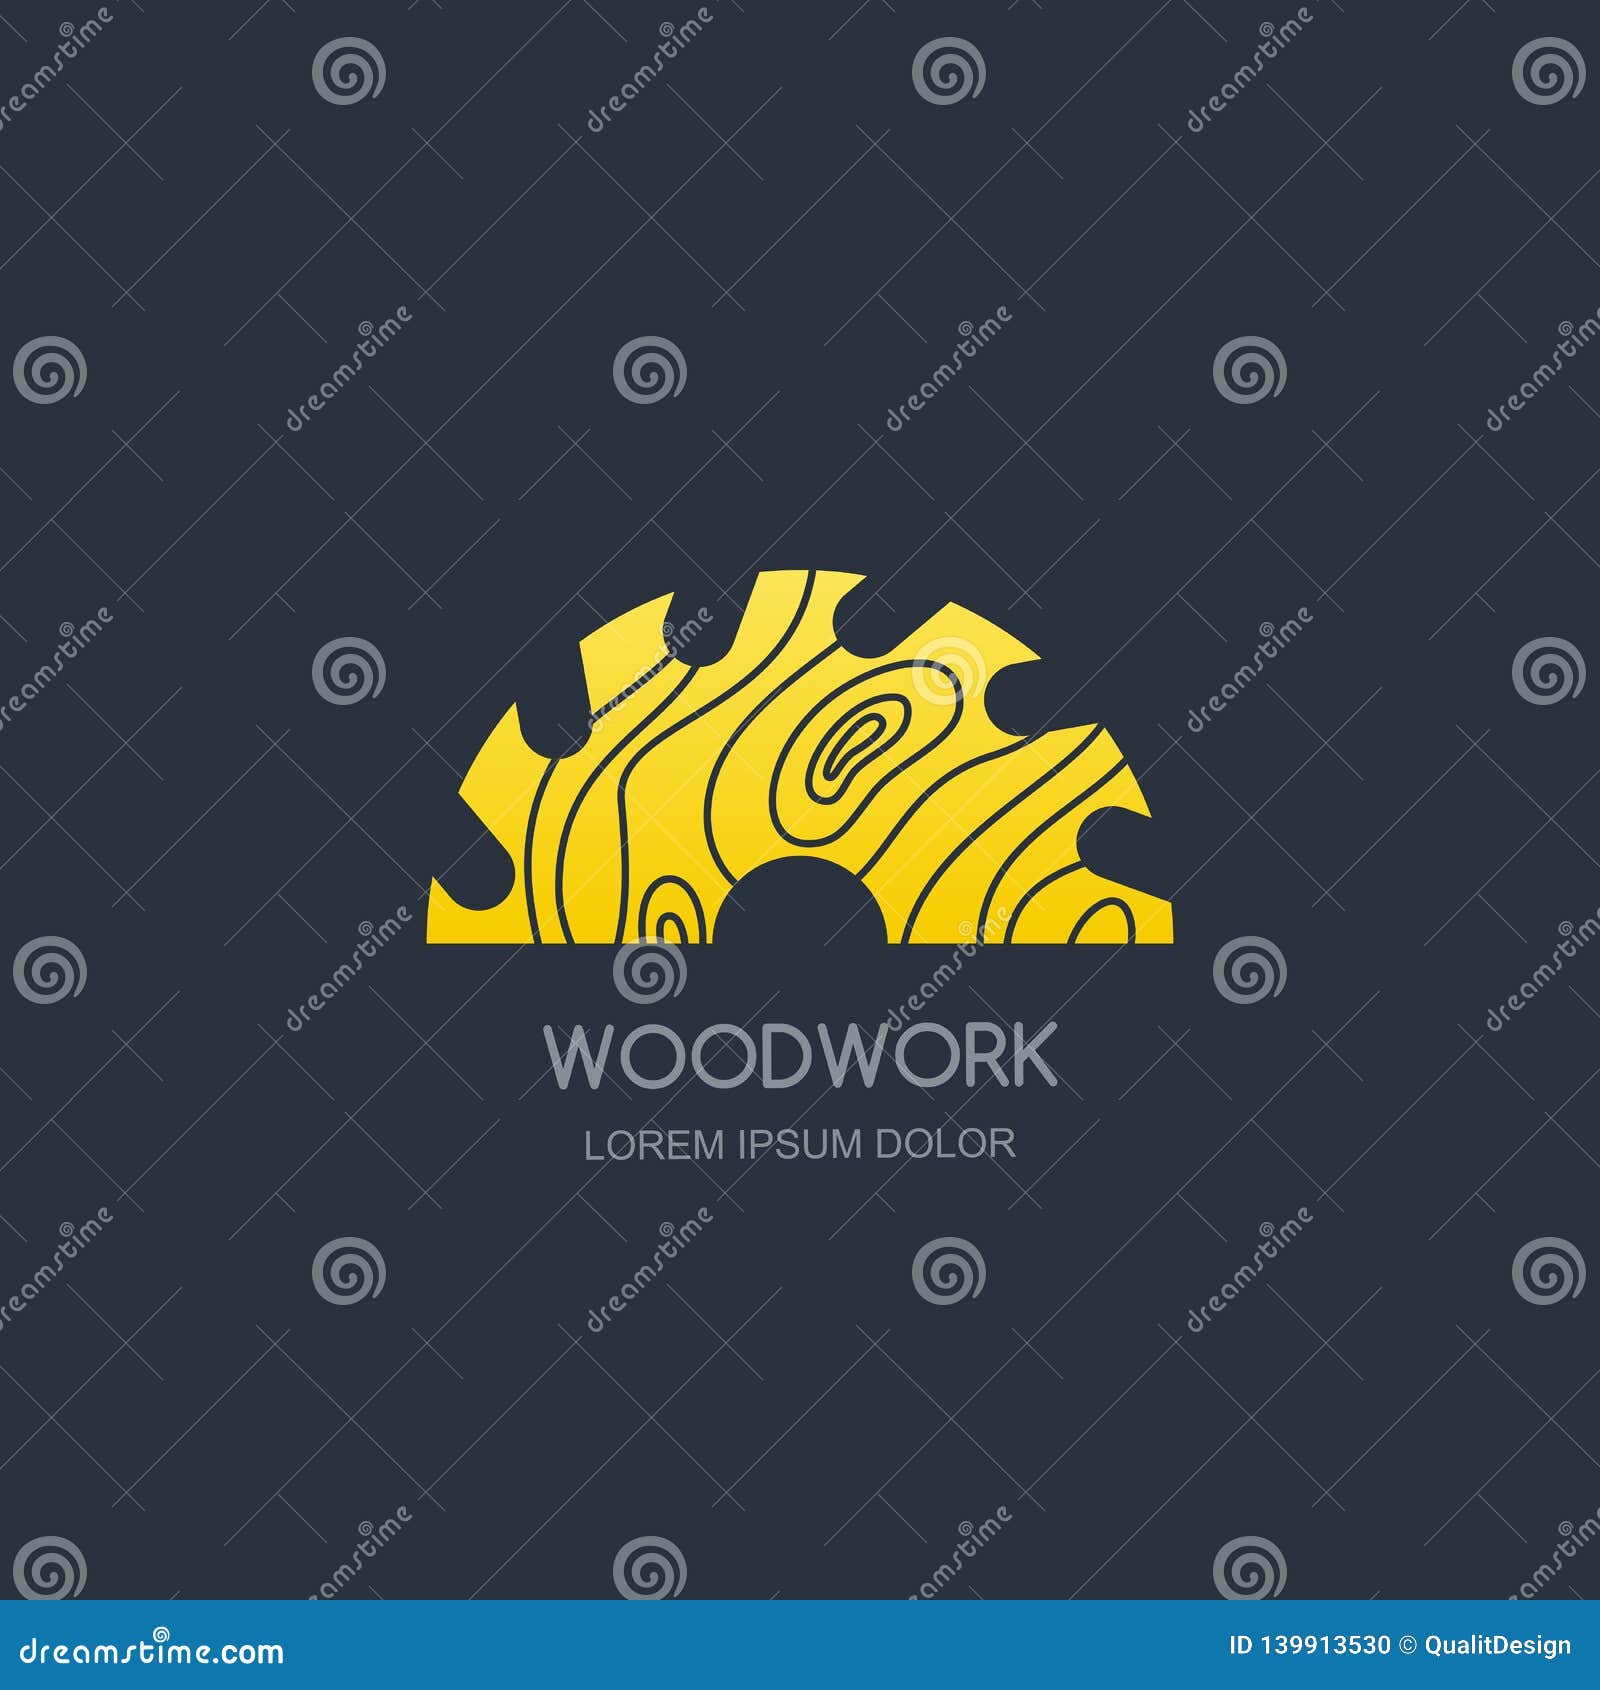 woodwork and carpentry logo emblem concept. circular saw with wooden rings texture,  label icon 